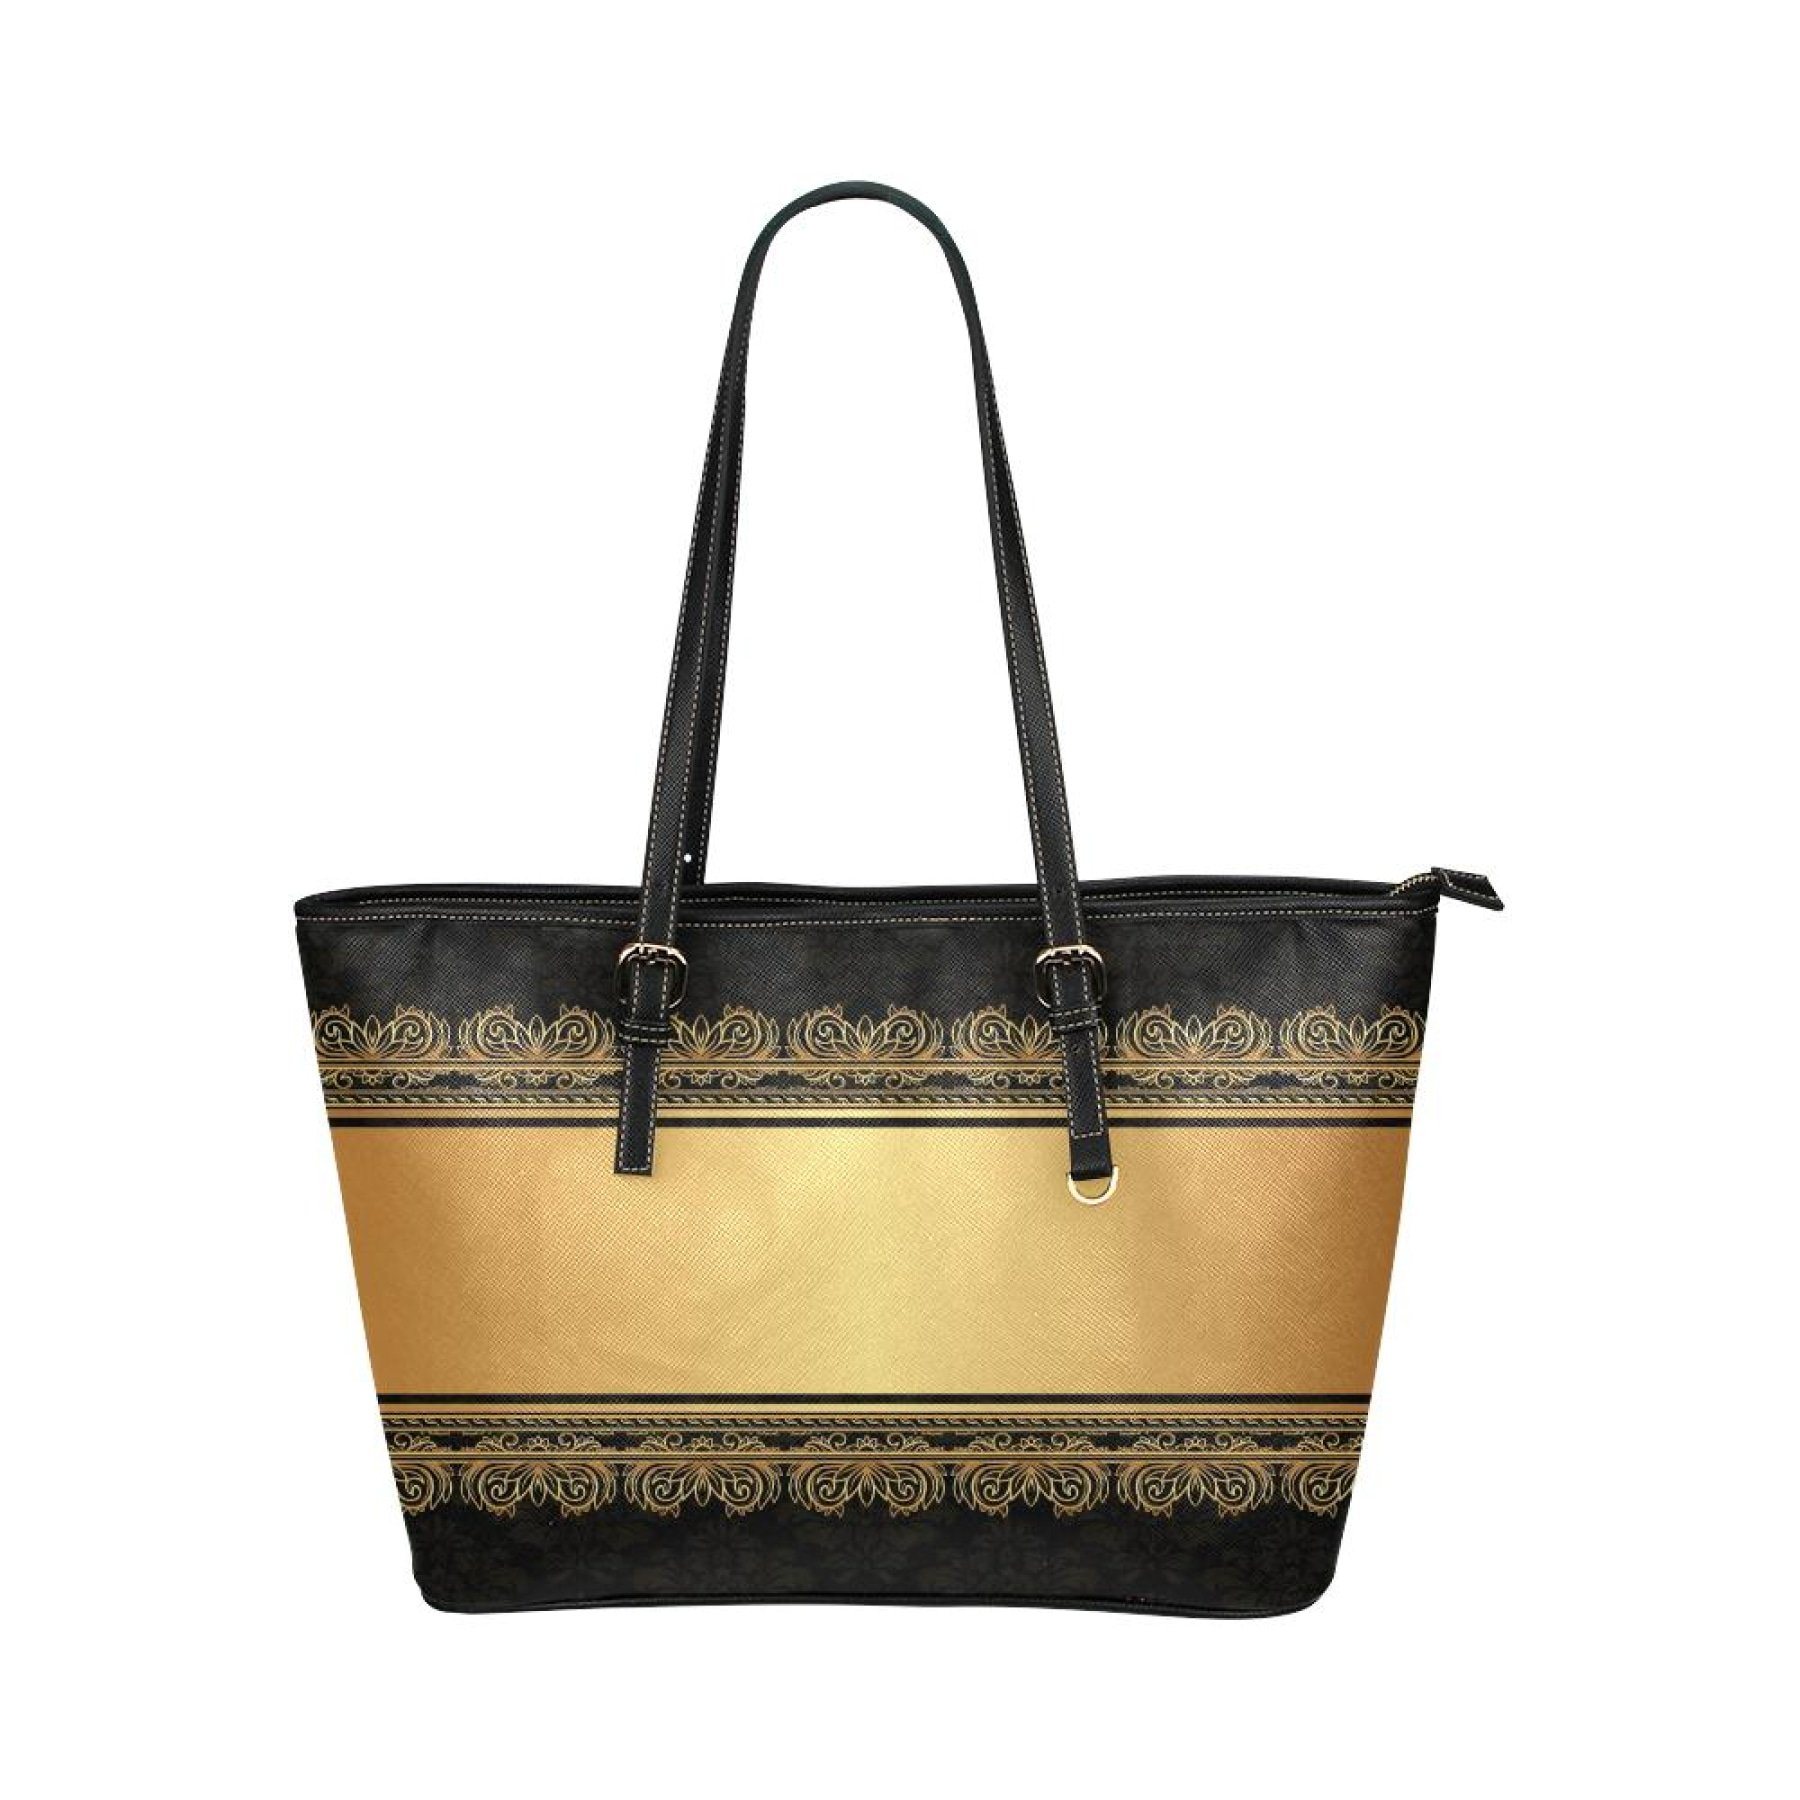 Black And Gold Vintage Style Leather Tote Bag 14